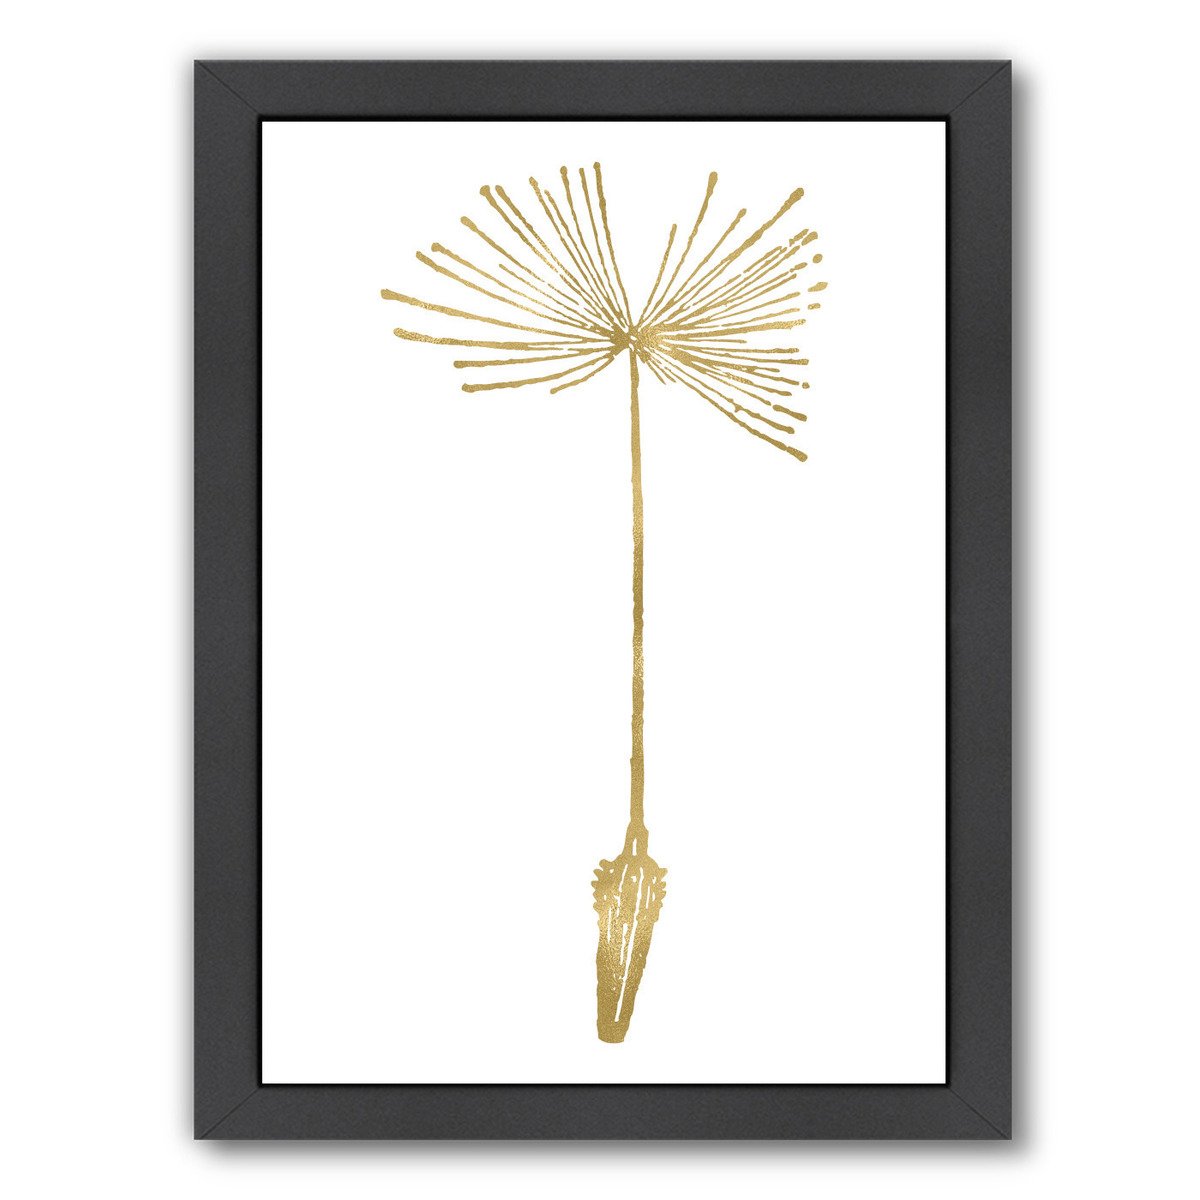 Dandelion 1 Gold On White by Amy Brinkman Framed Print - Wall Art - Americanflat